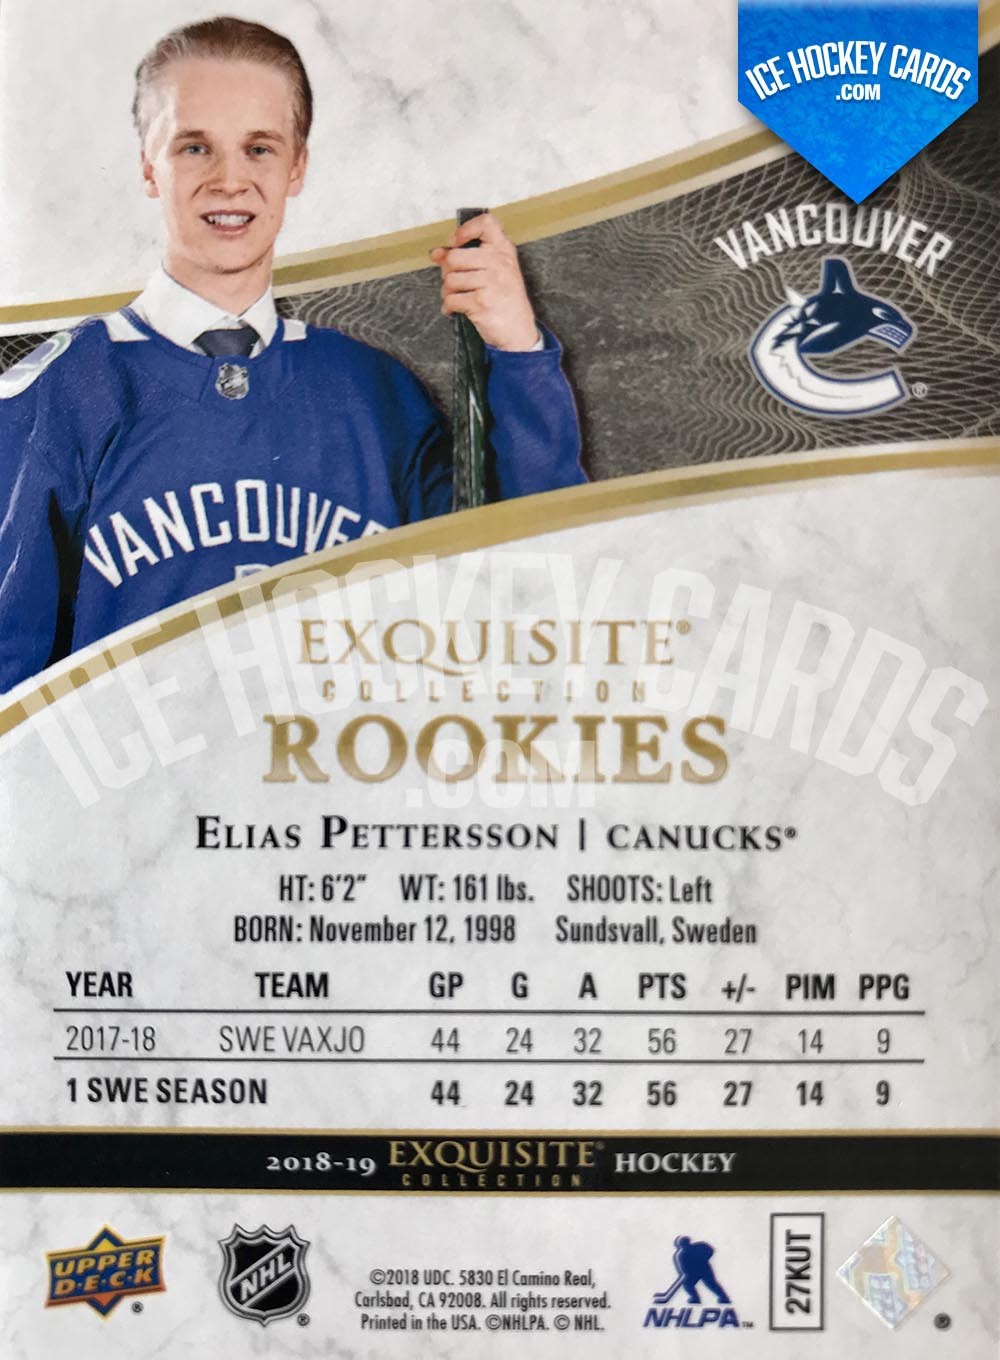 Upper Deck - Exquisite Collection 2018-19 - Elias Pettersson Exquisite Rookies Card # to 41 RARE back